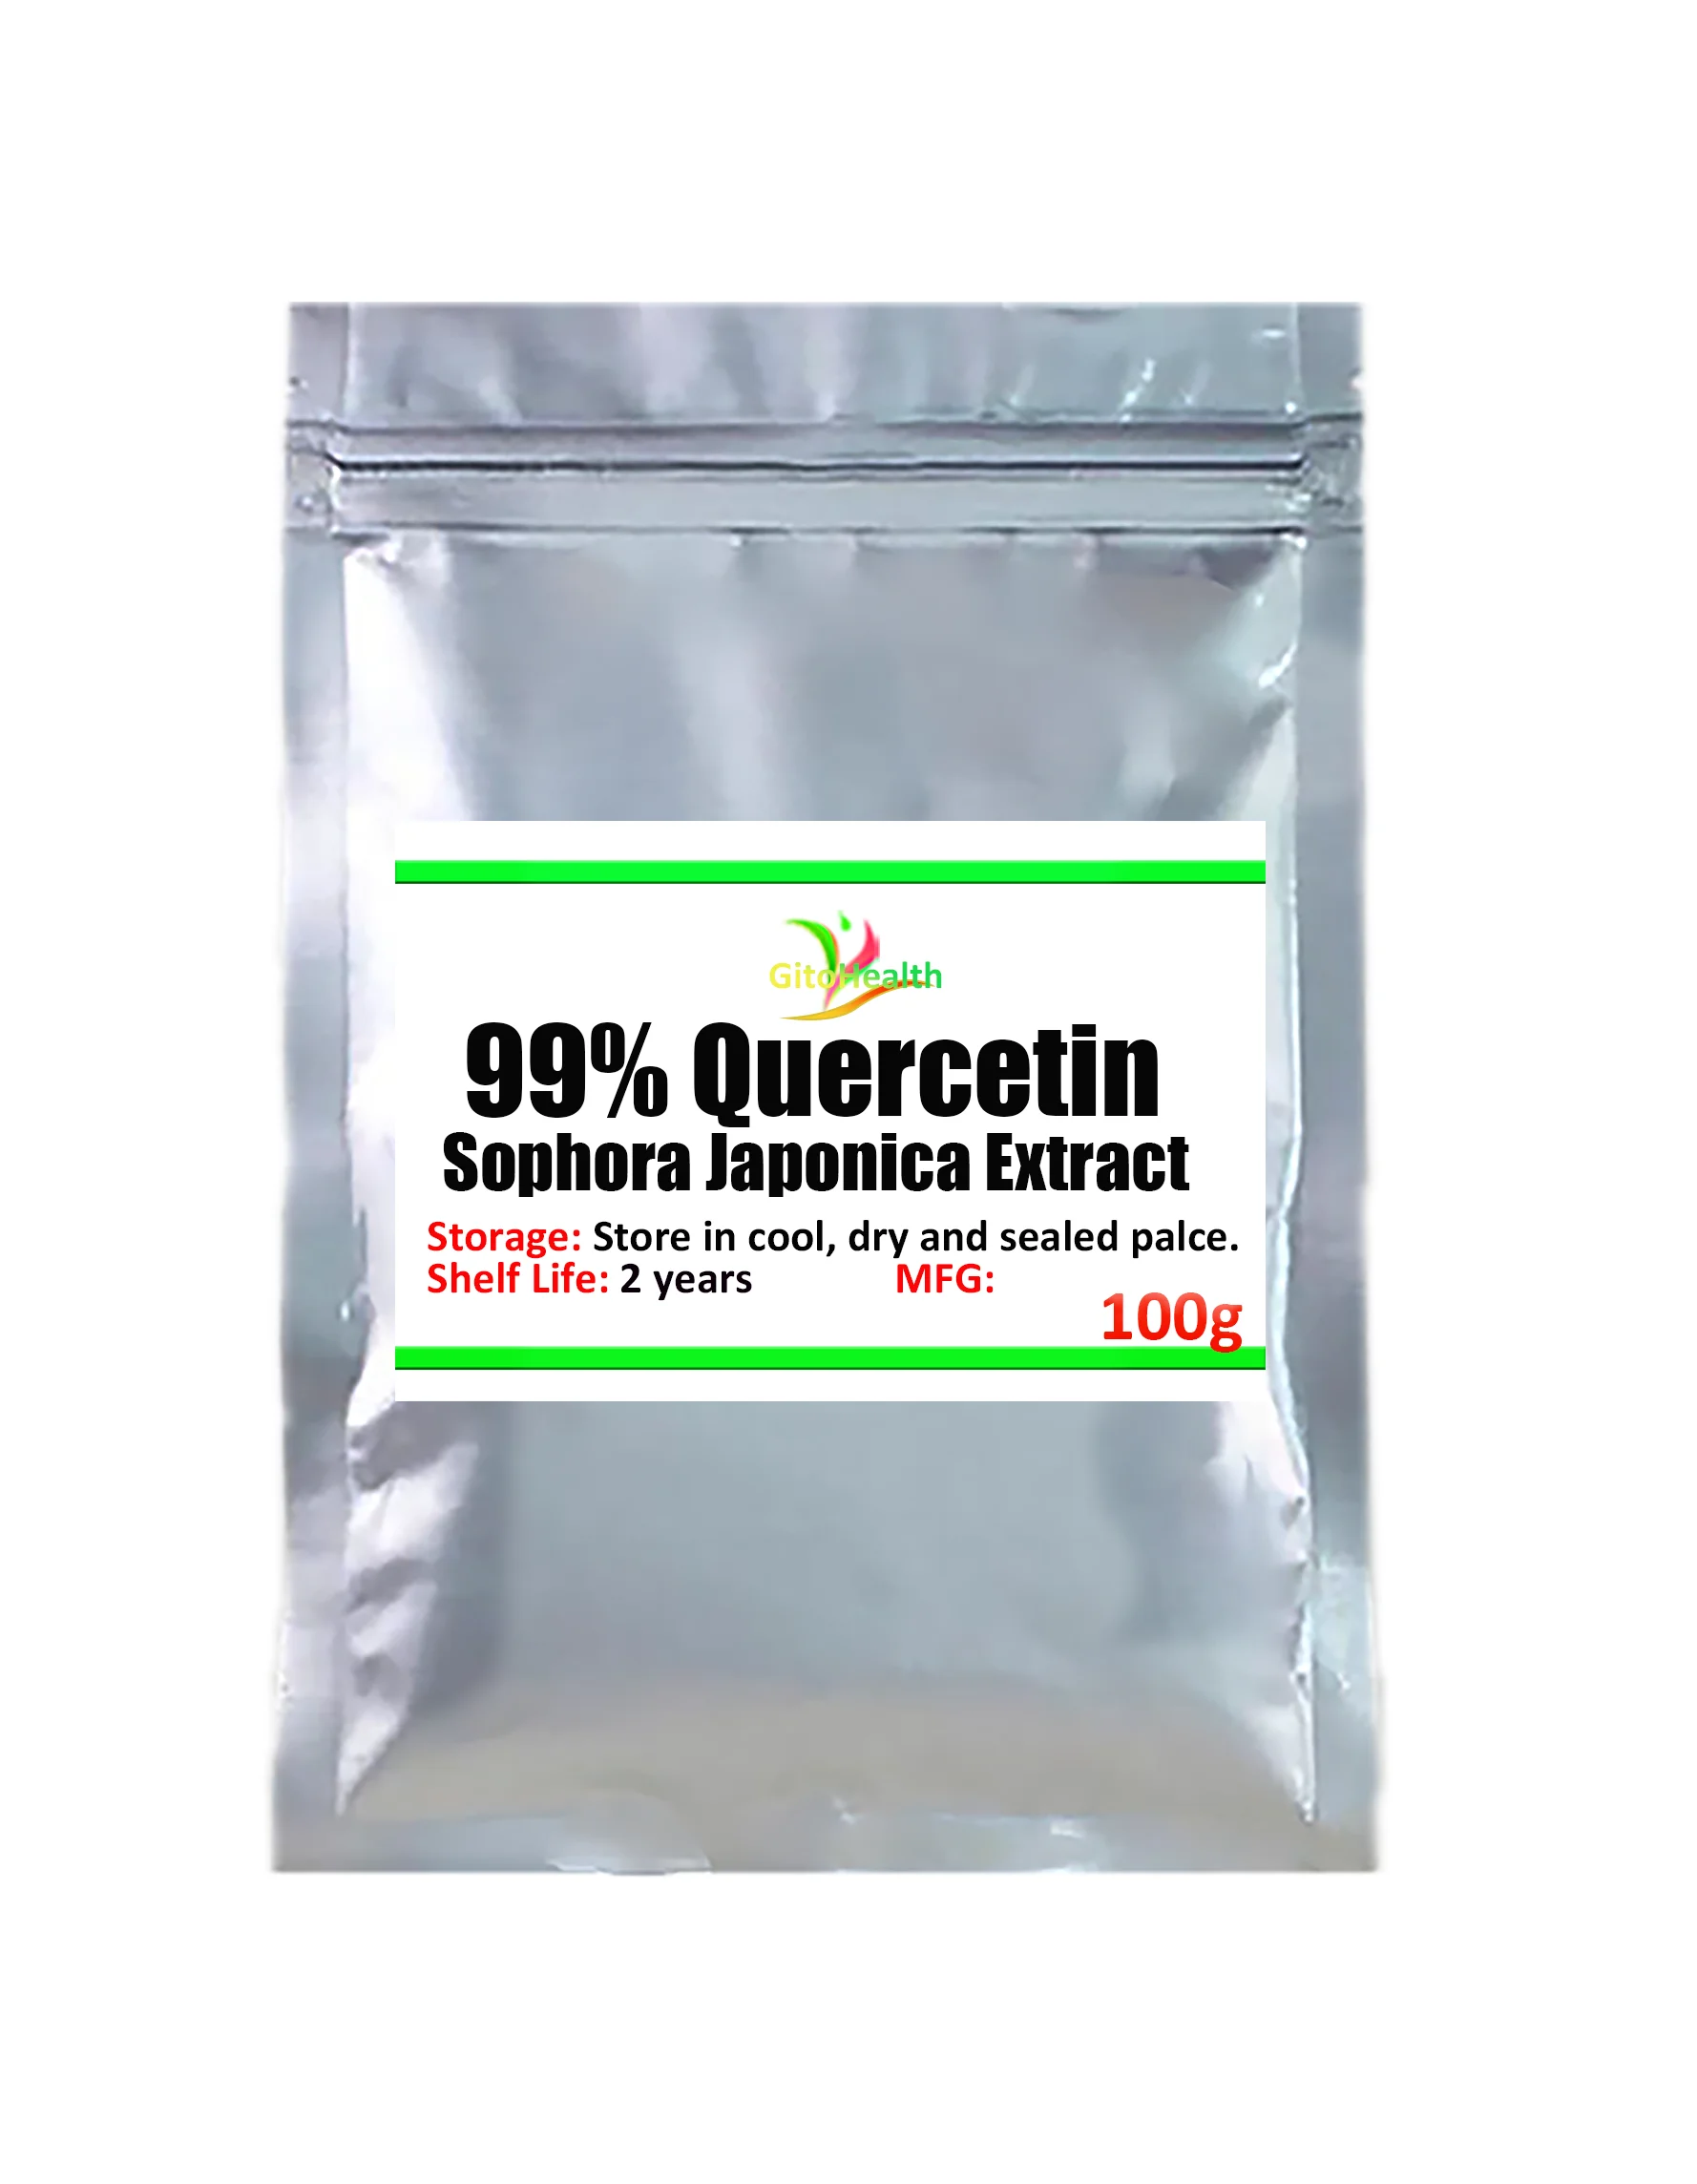 

99% quercetin powder, organic Sophora japonica extract, anti-cancer. High quality, ISO certification, free delivery